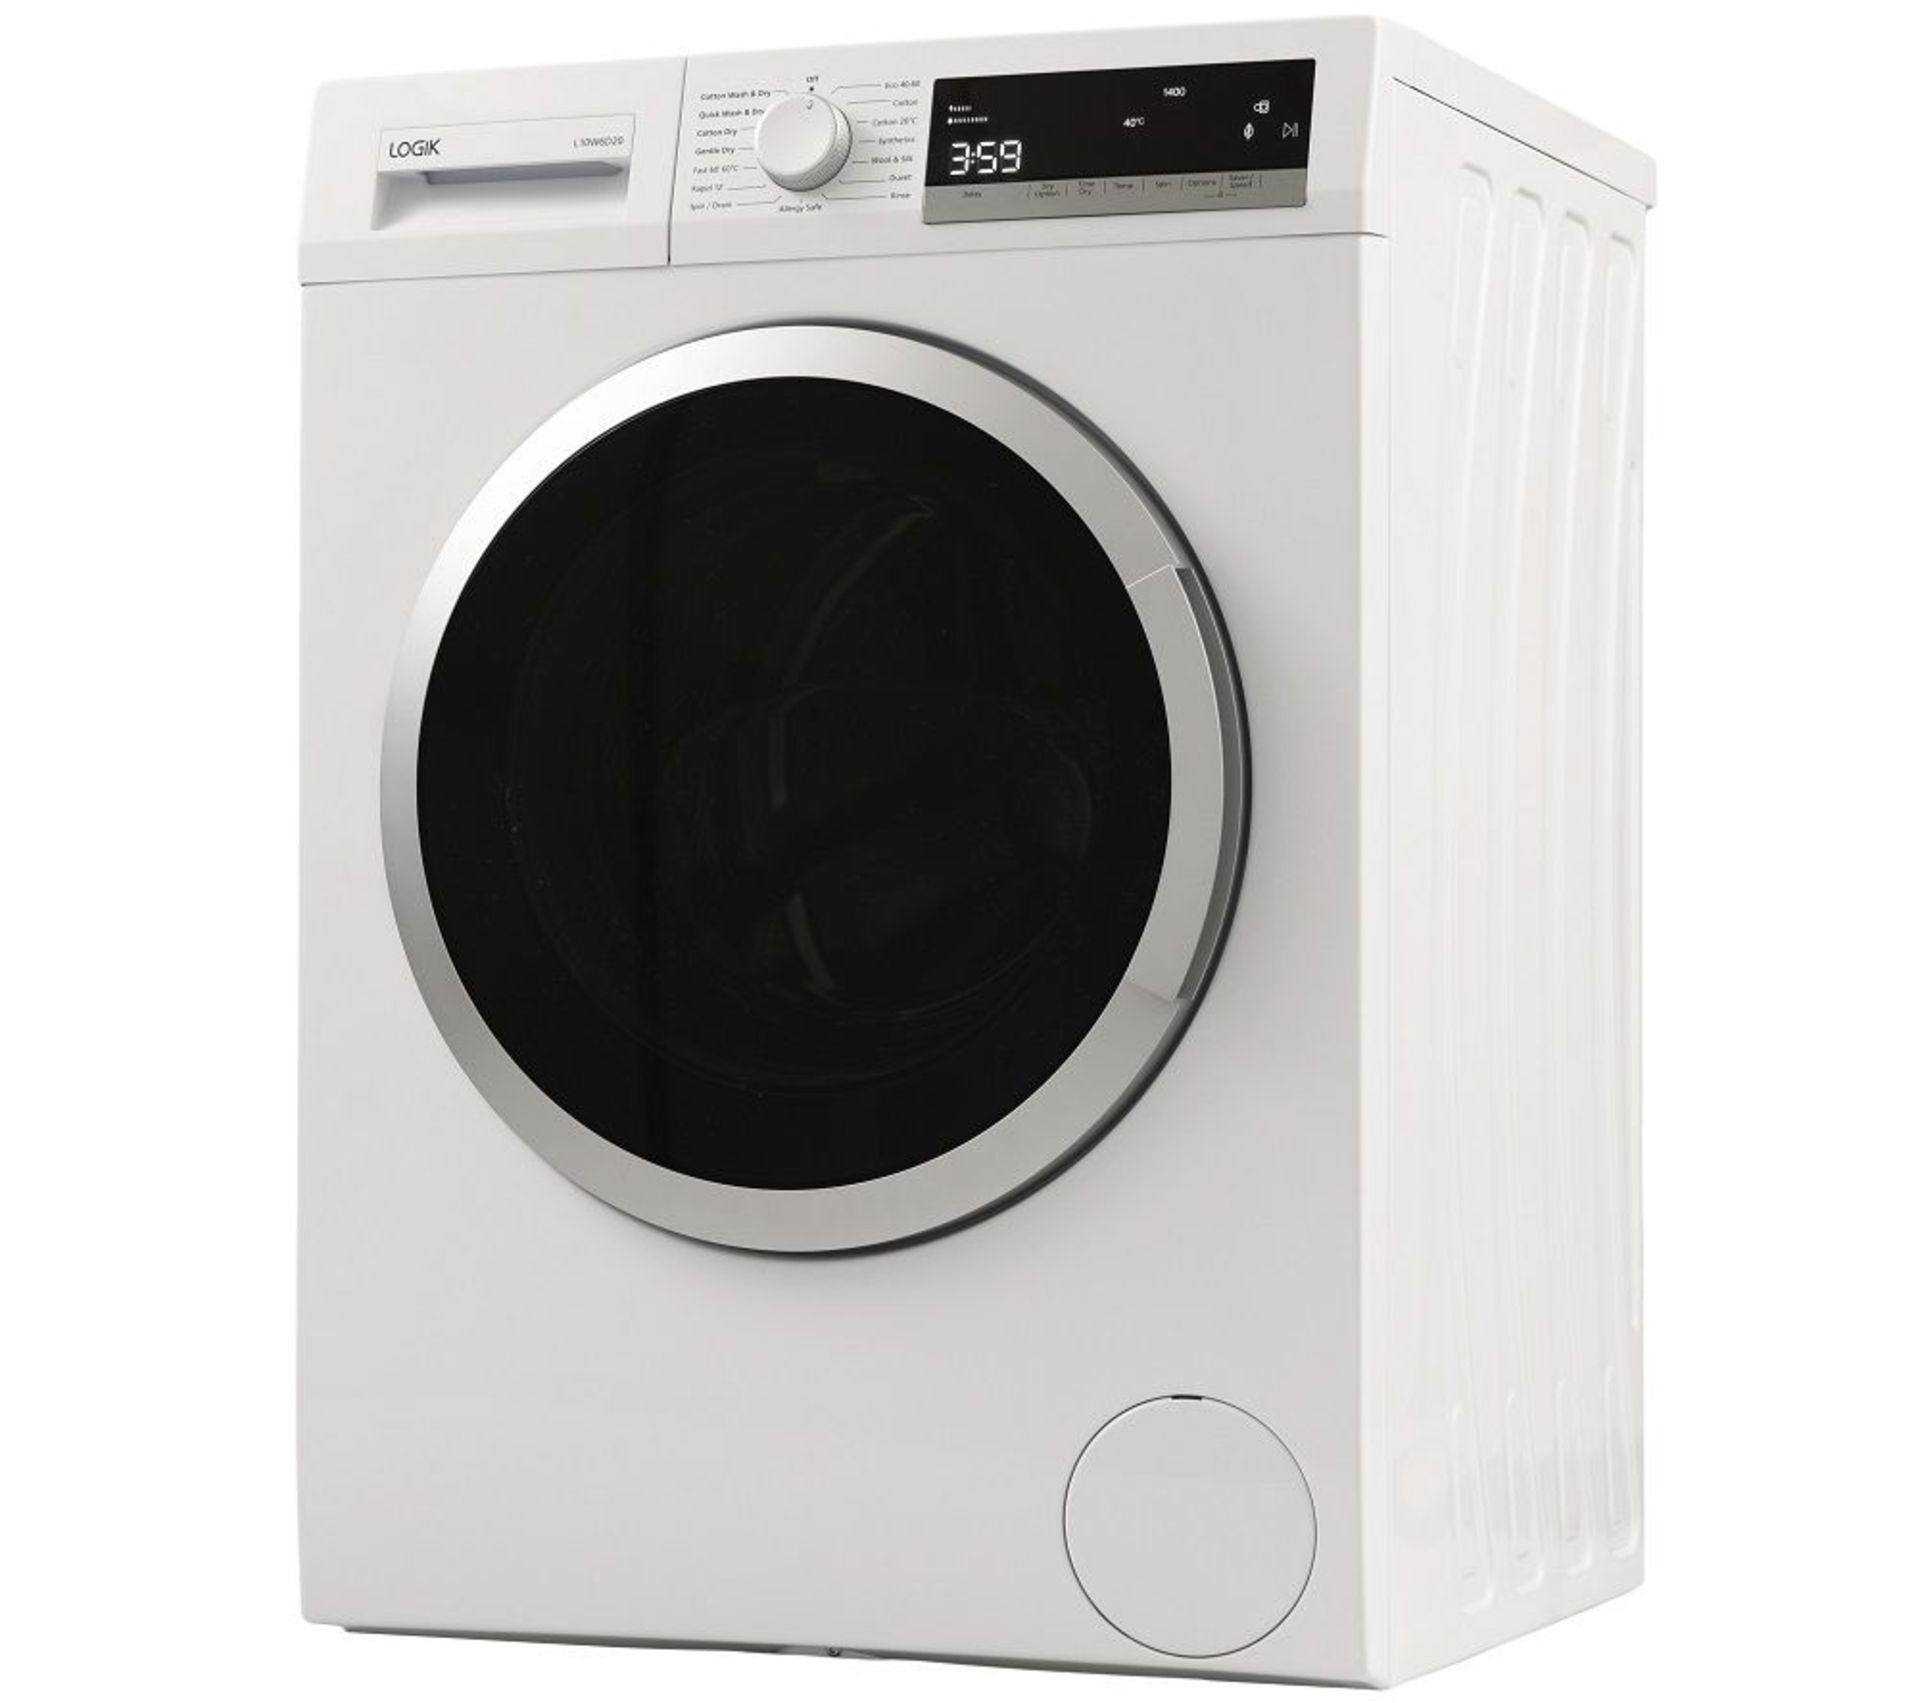 Pallet of Mixed Laundry White Goods. Brands include Logik & Kenwood. Latest selling price £799.94